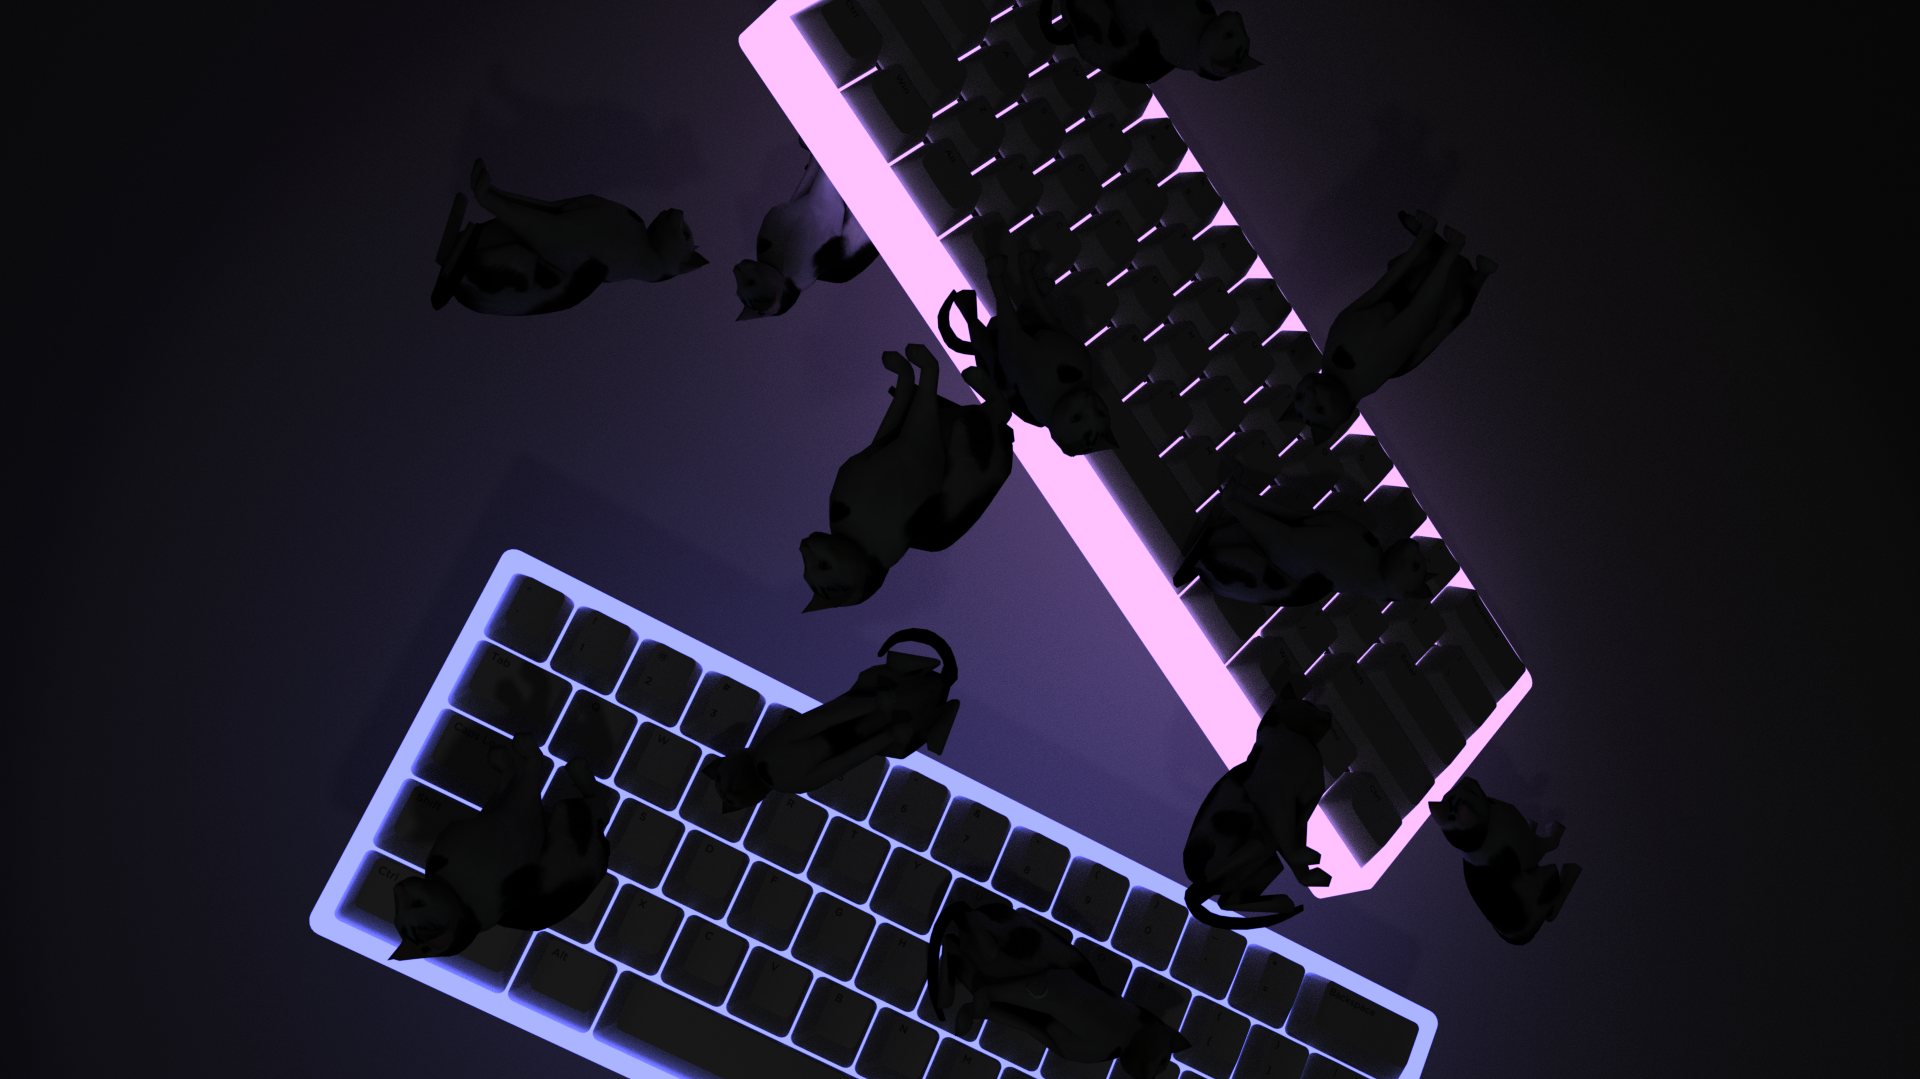 Keyboards Falling With Cats Aesthetic 4k